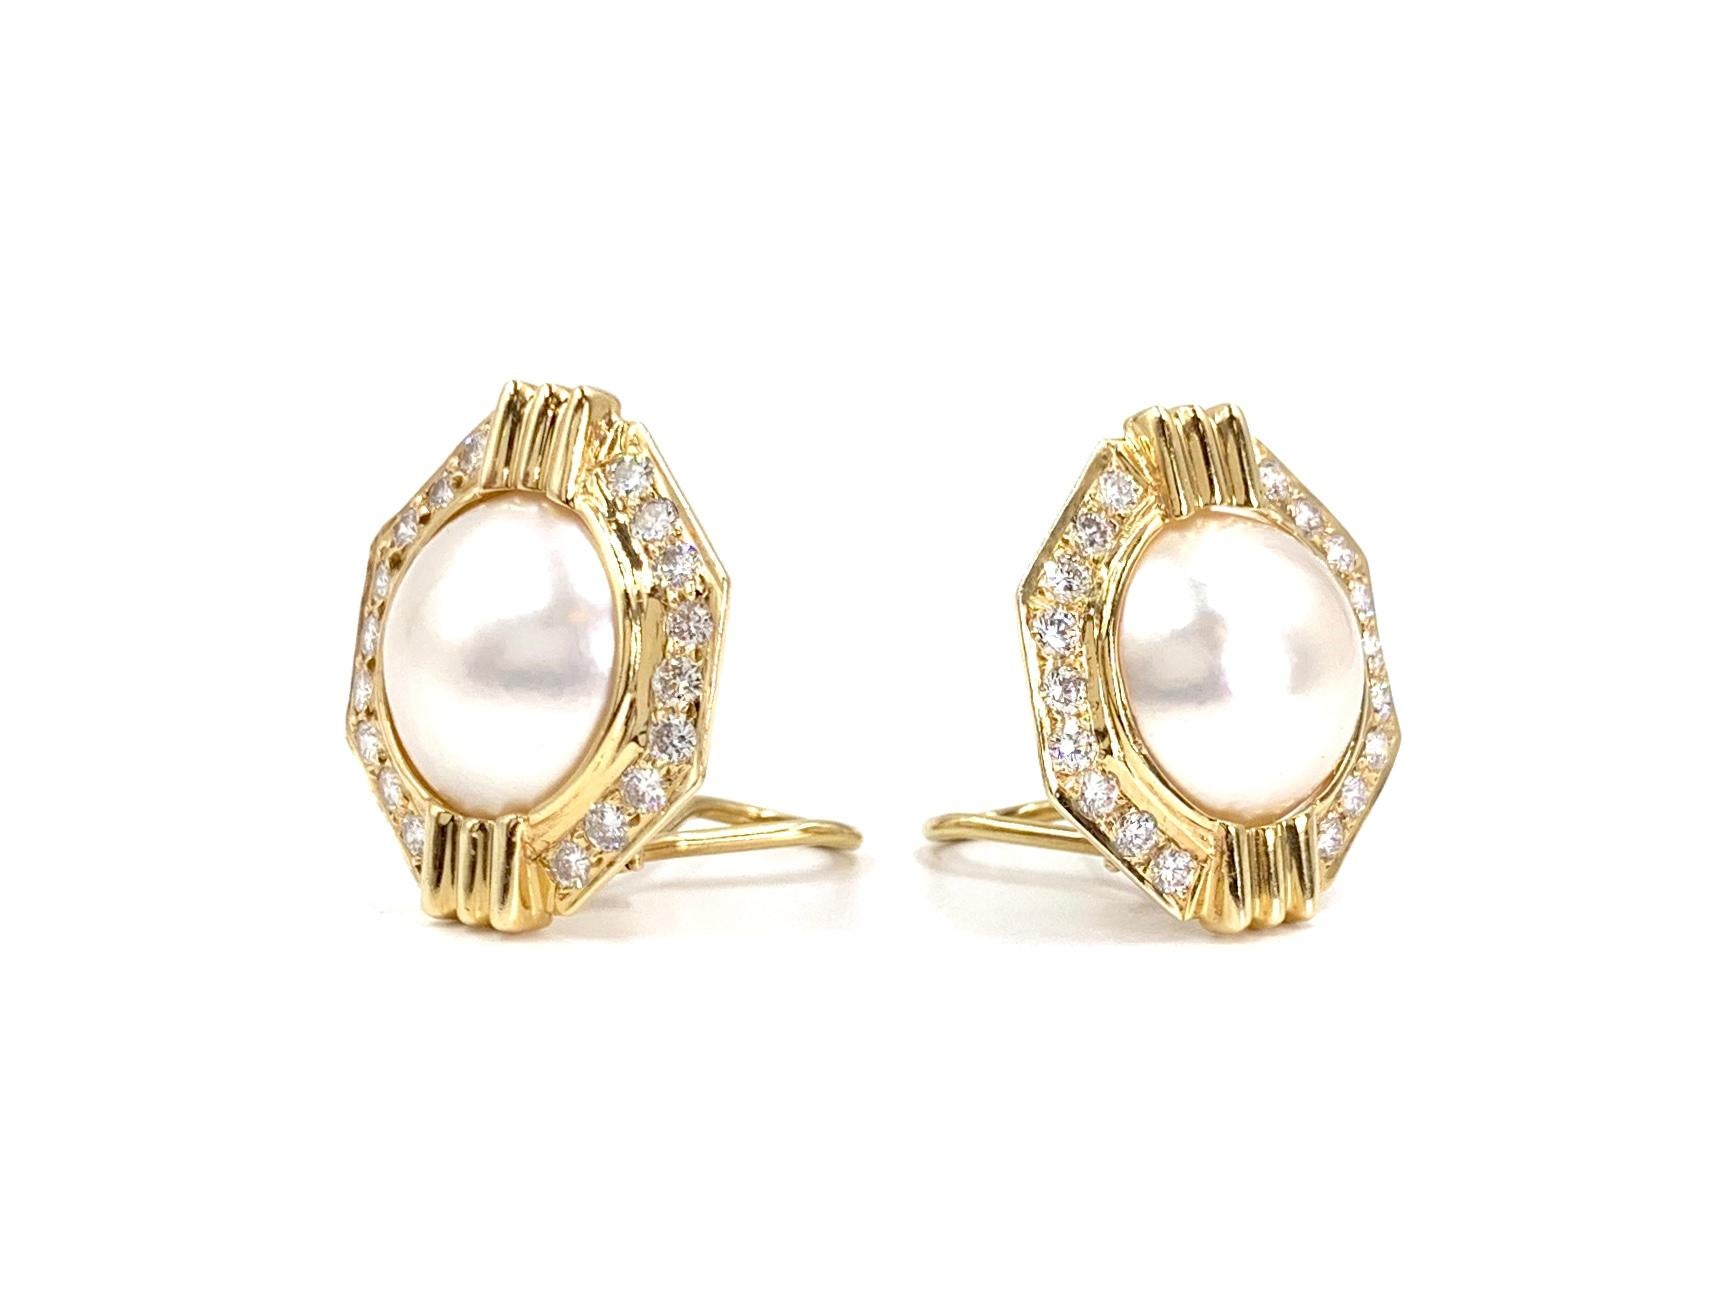 Comfortable and wearable polished 14 karat yellow gold genuine mabé pearl and round brilliant diamond button style geometric octagon earrings. Earrings have an approximate total weight of 1.80 carats with approximate quality of F-G color, SI1